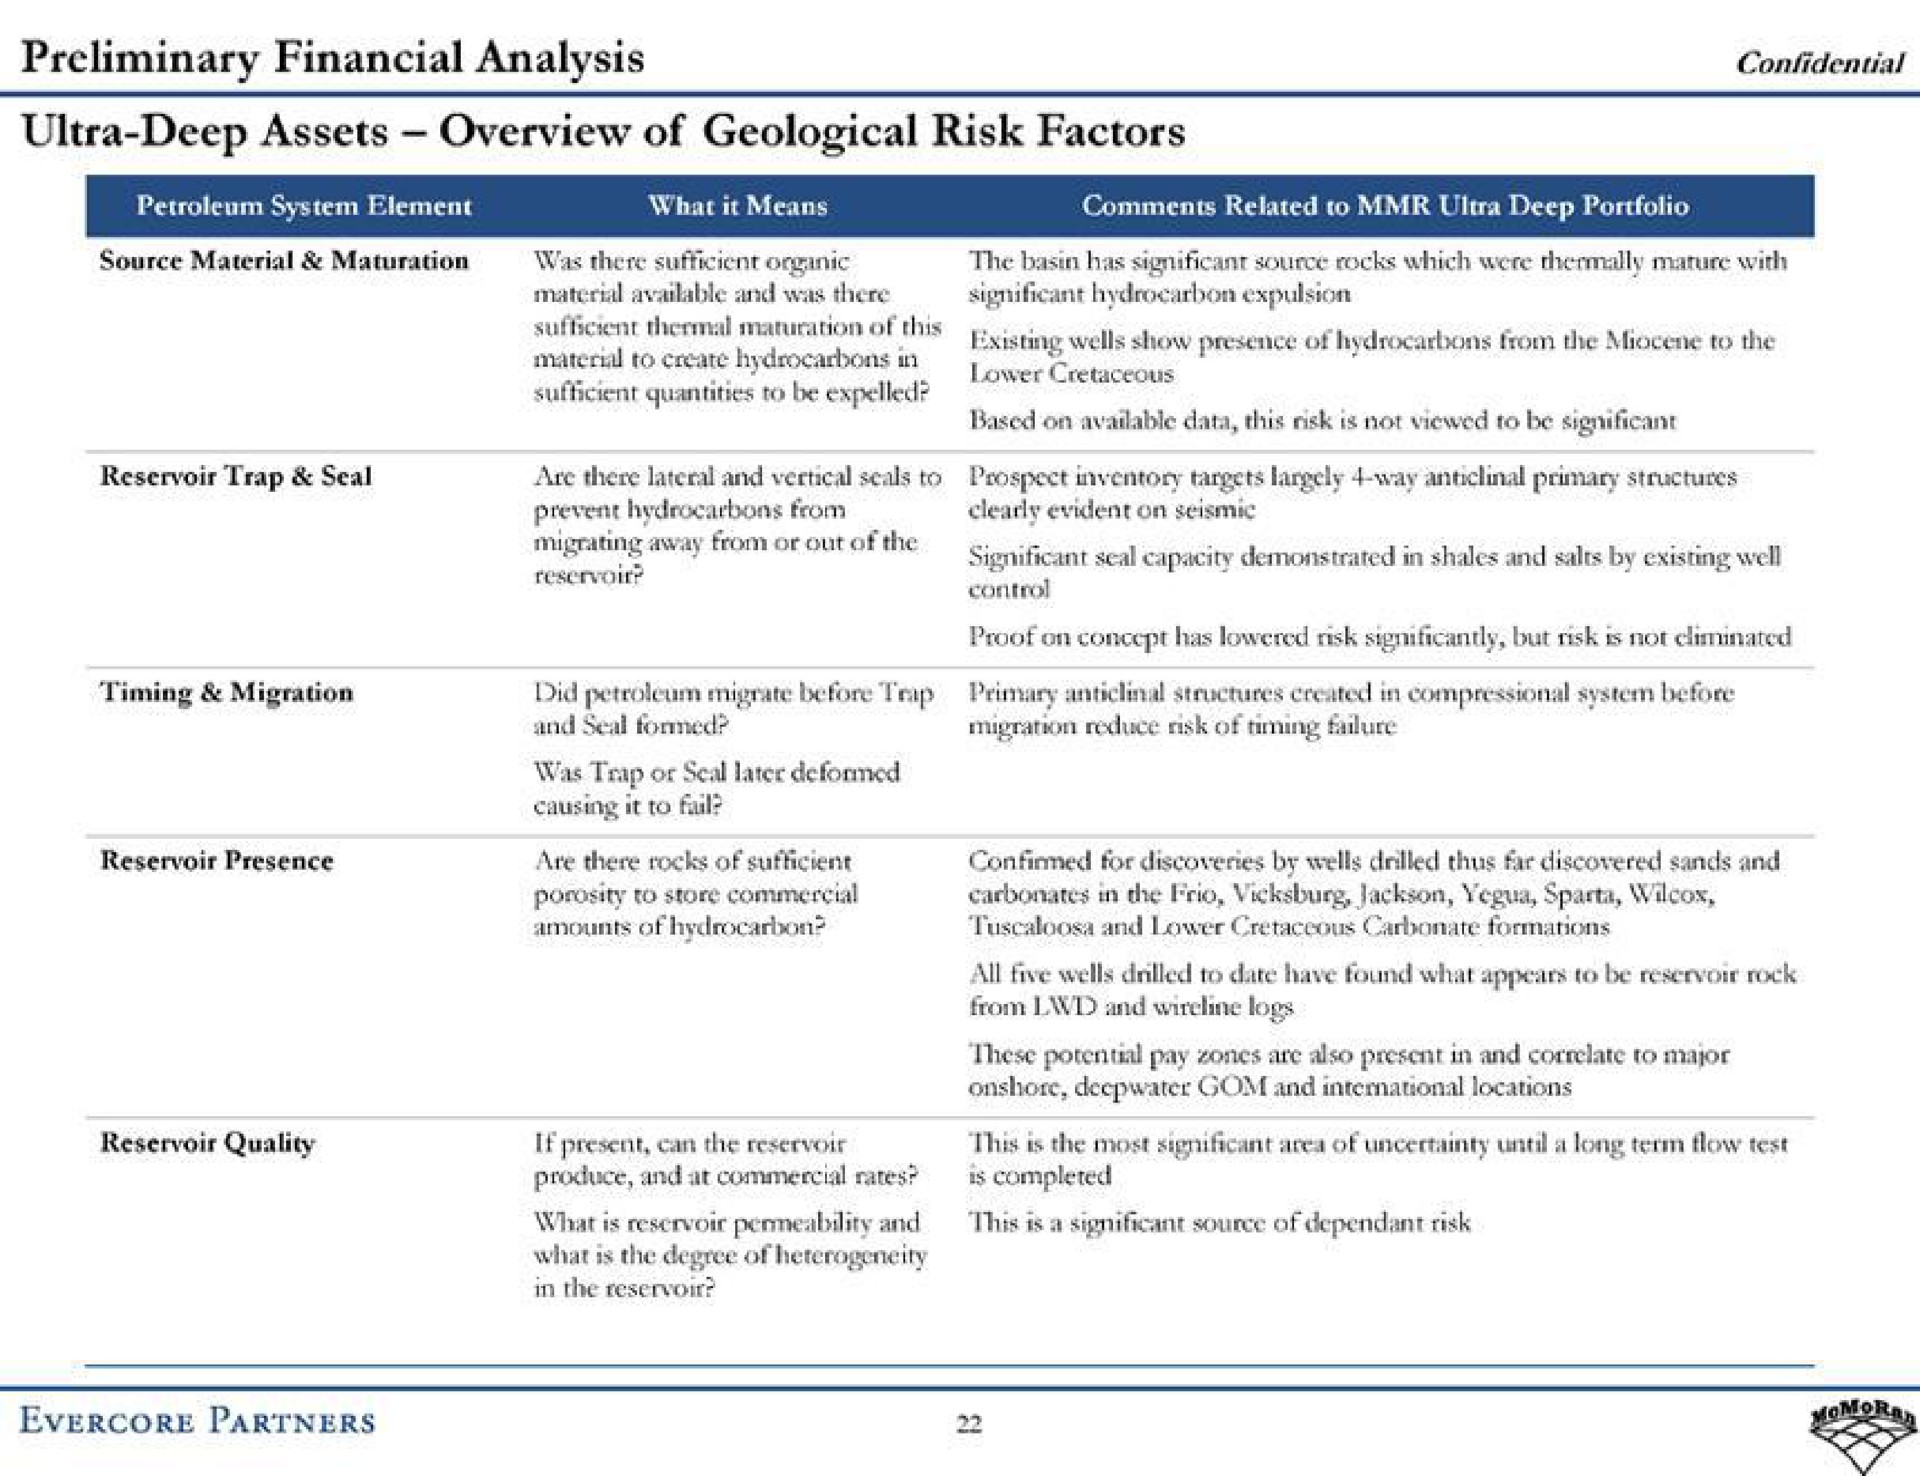 preliminary financial analysis ultra deep assets overview of geological risk factors | Evercore